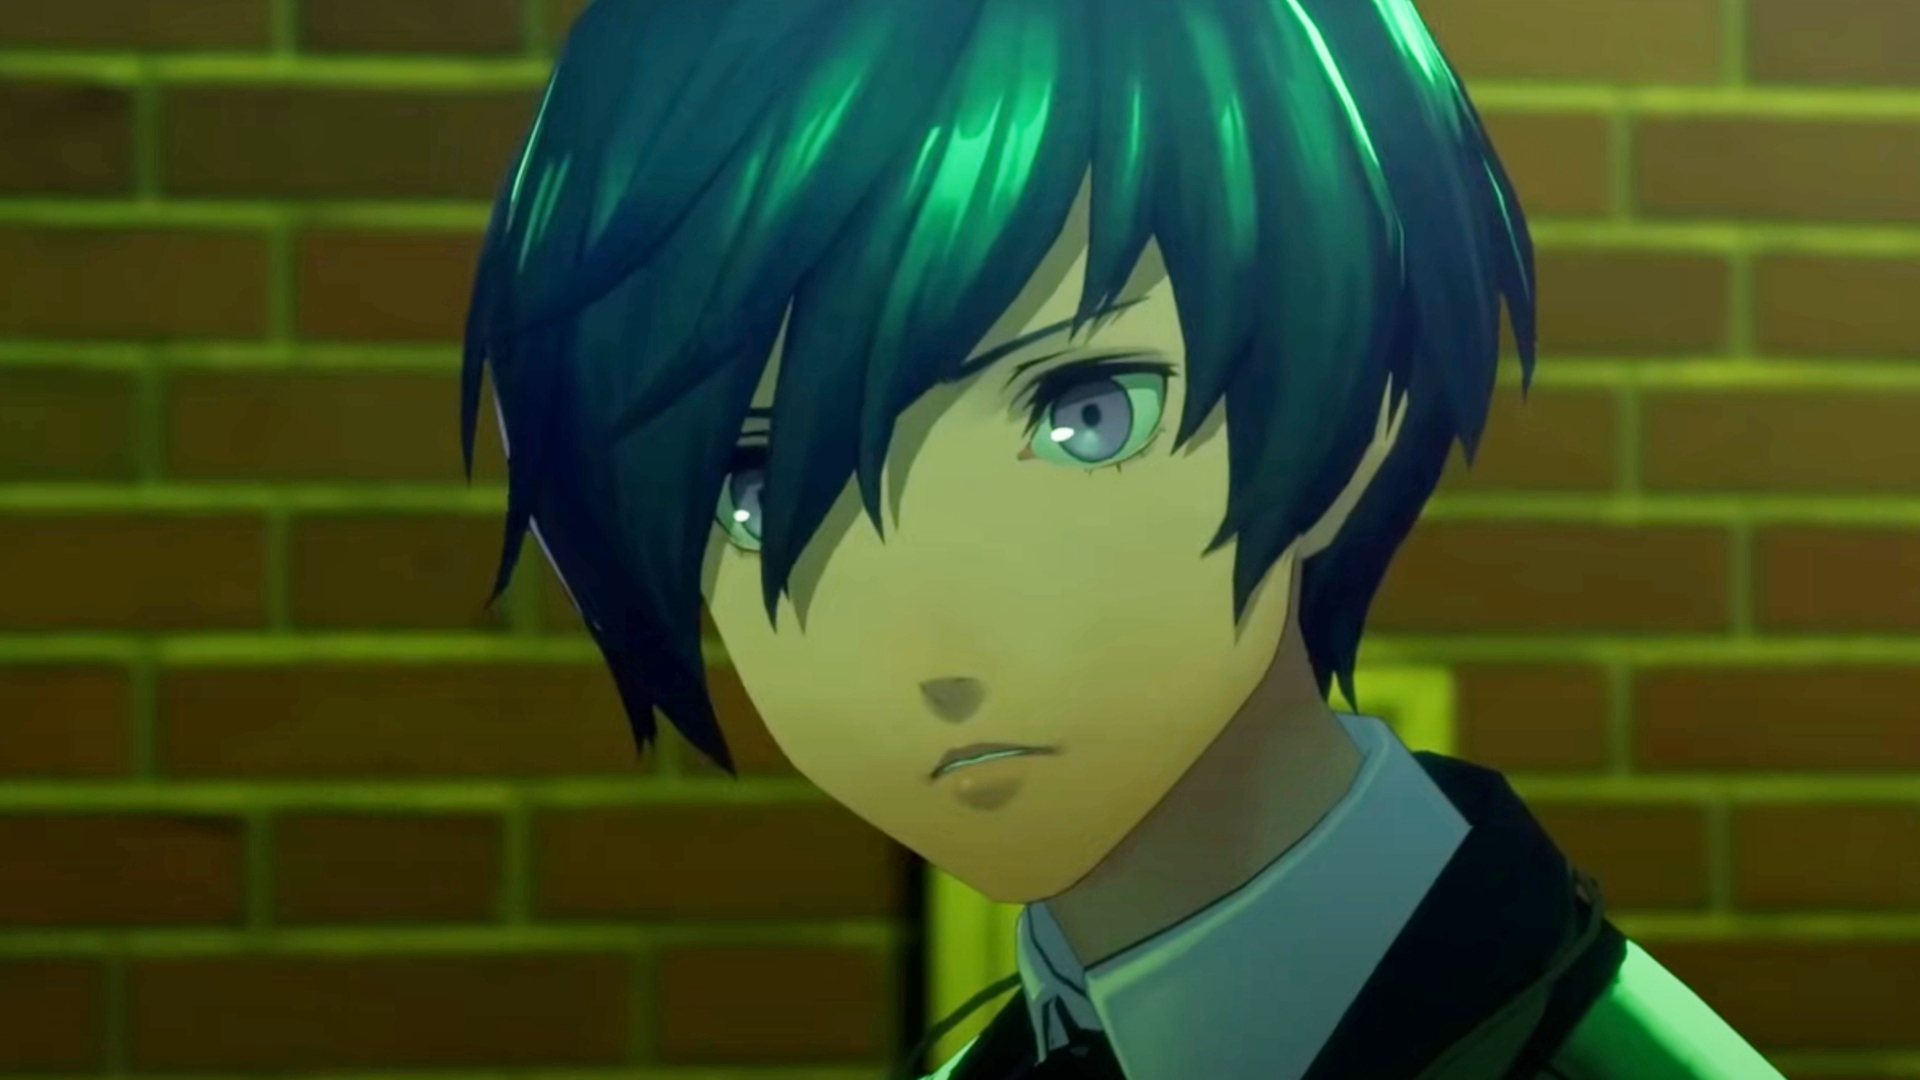 Persona 3 Reload is Atlus' biggest Steam launch ever